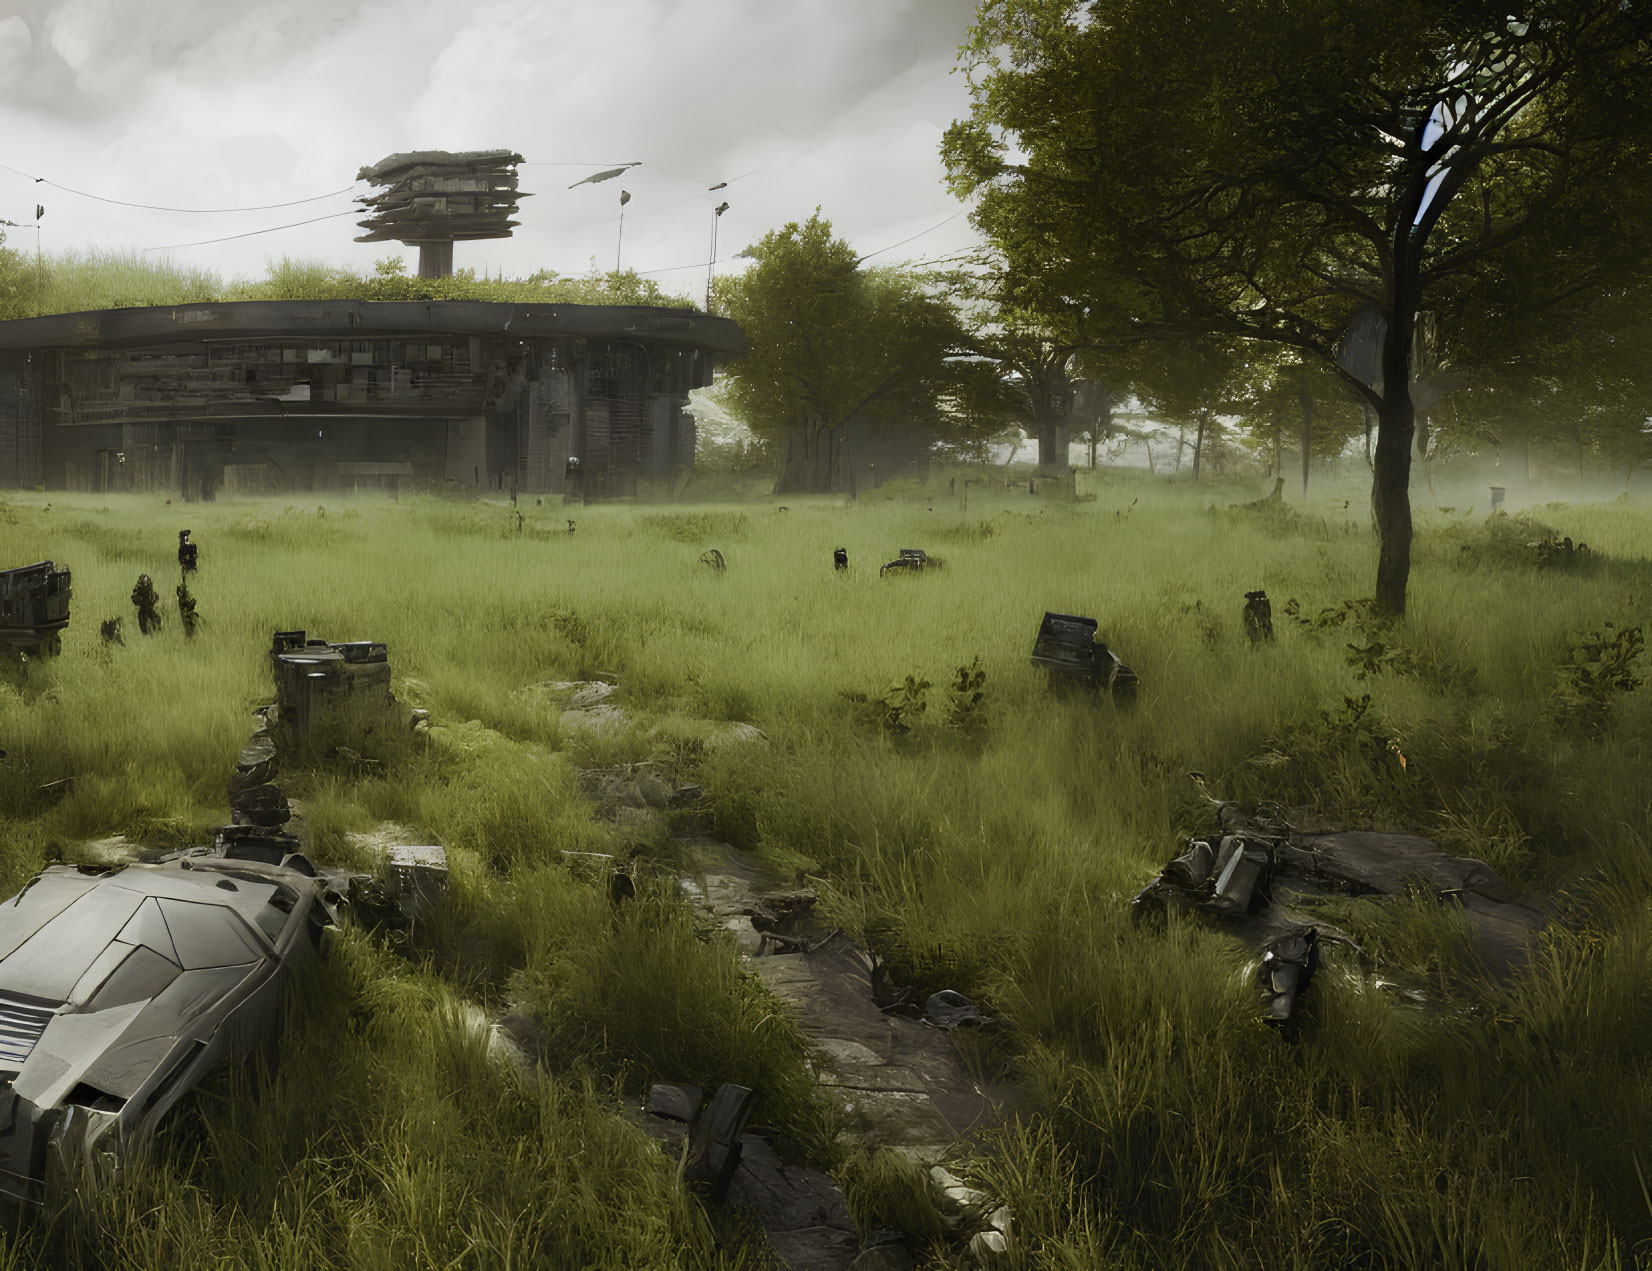 Desolate post-apocalyptic landscape with overgrown vegetation and abandoned cars.